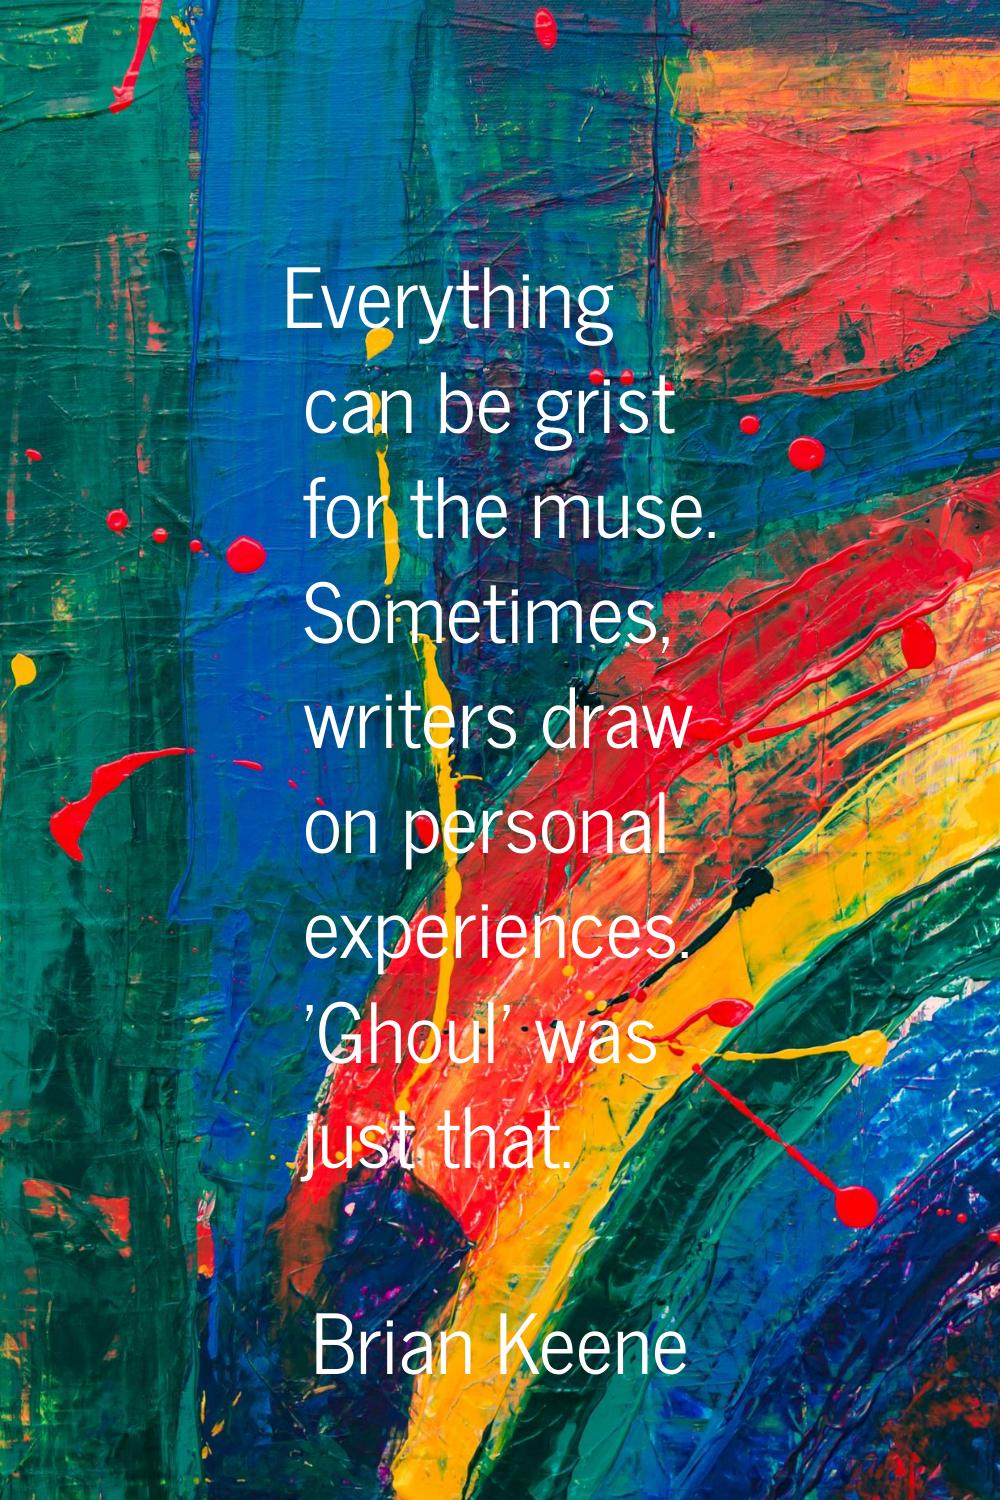 Everything can be grist for the muse. Sometimes, writers draw on personal experiences. 'Ghoul' was 